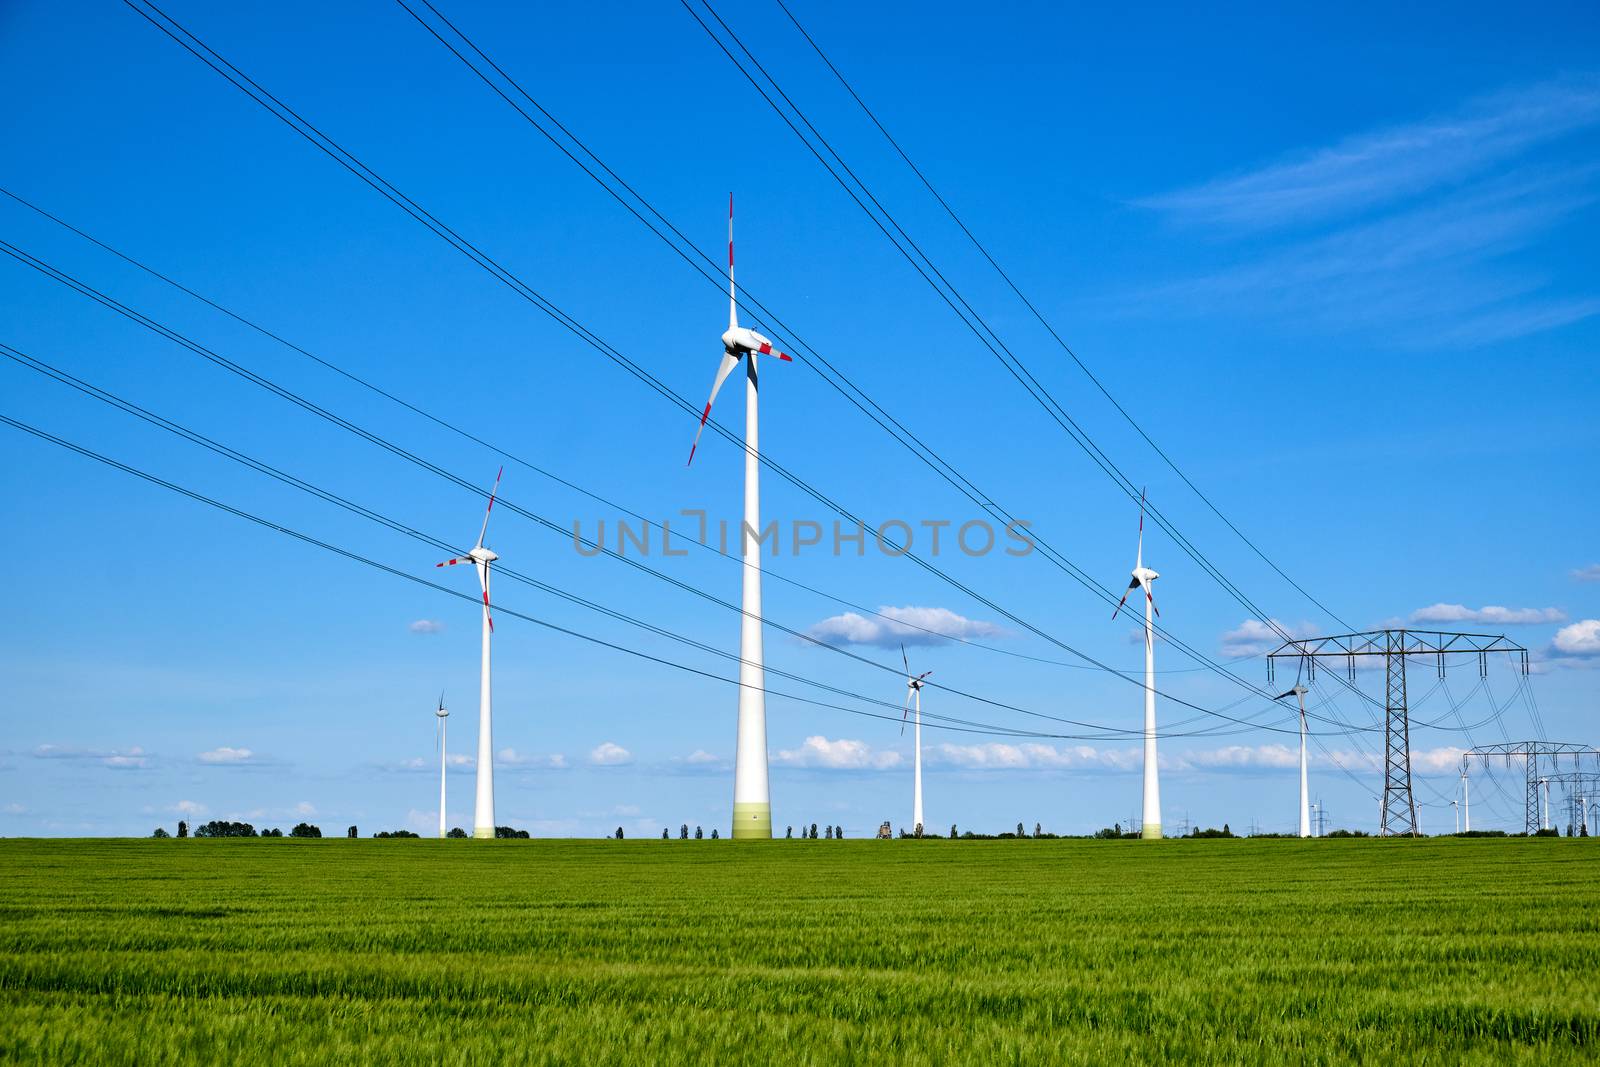 Power lines and wind engines on a sunny day seen in Germany